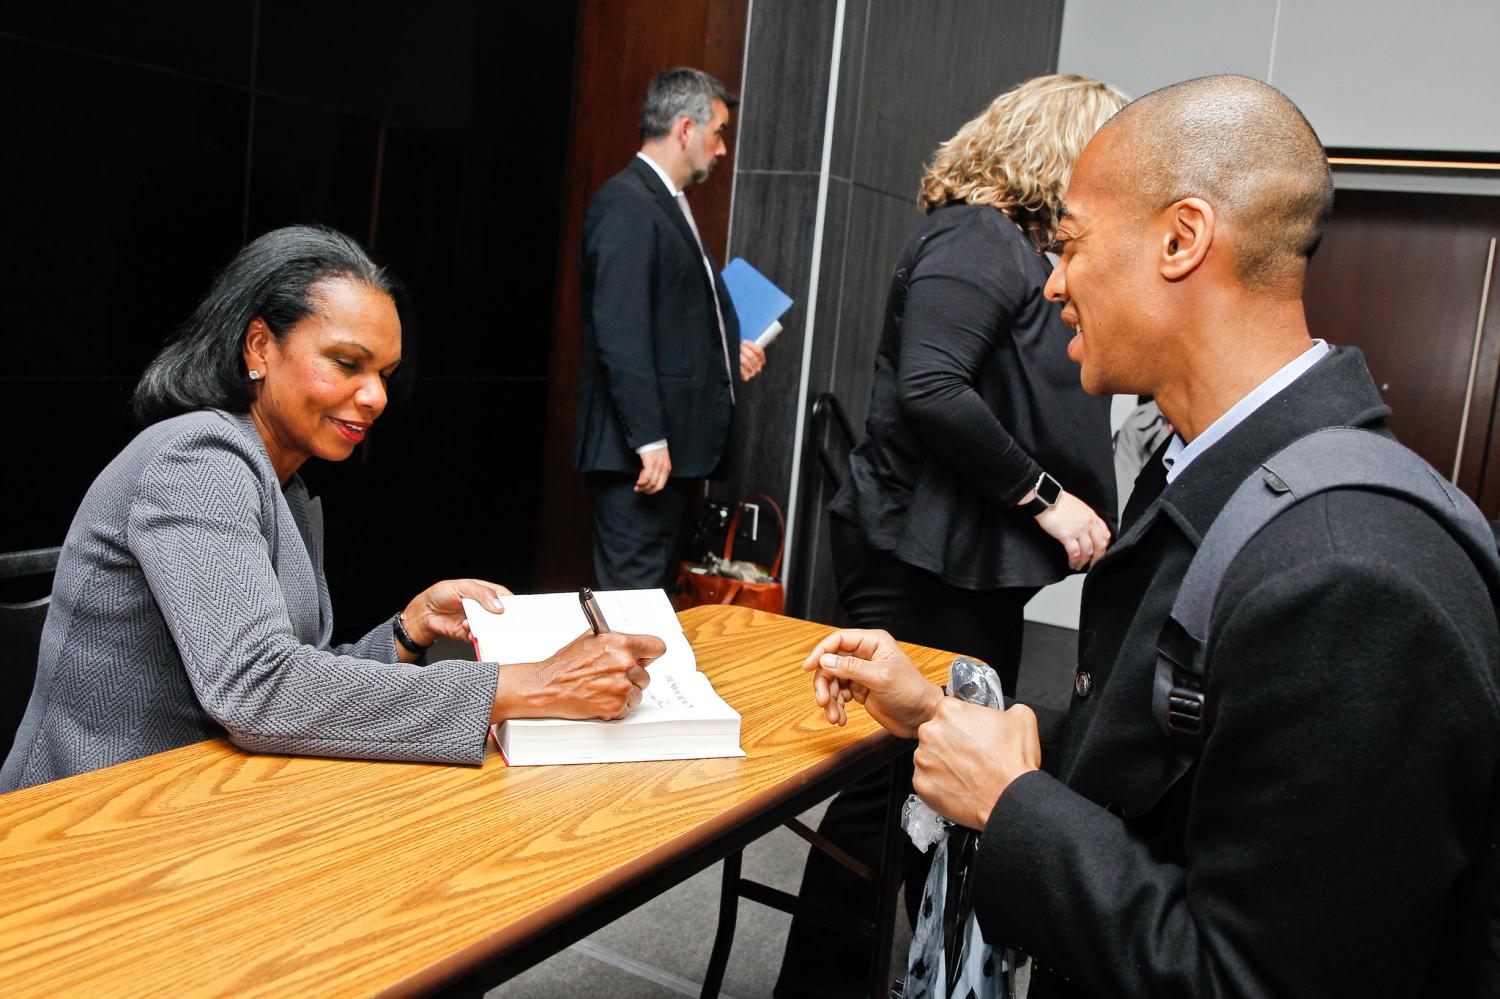 Dr. Condoleezza Rice, former U.S. secretary of state, signs copies of her book, “Democracy: Stories from the Long Road to Freedom,” at a Brookings event.